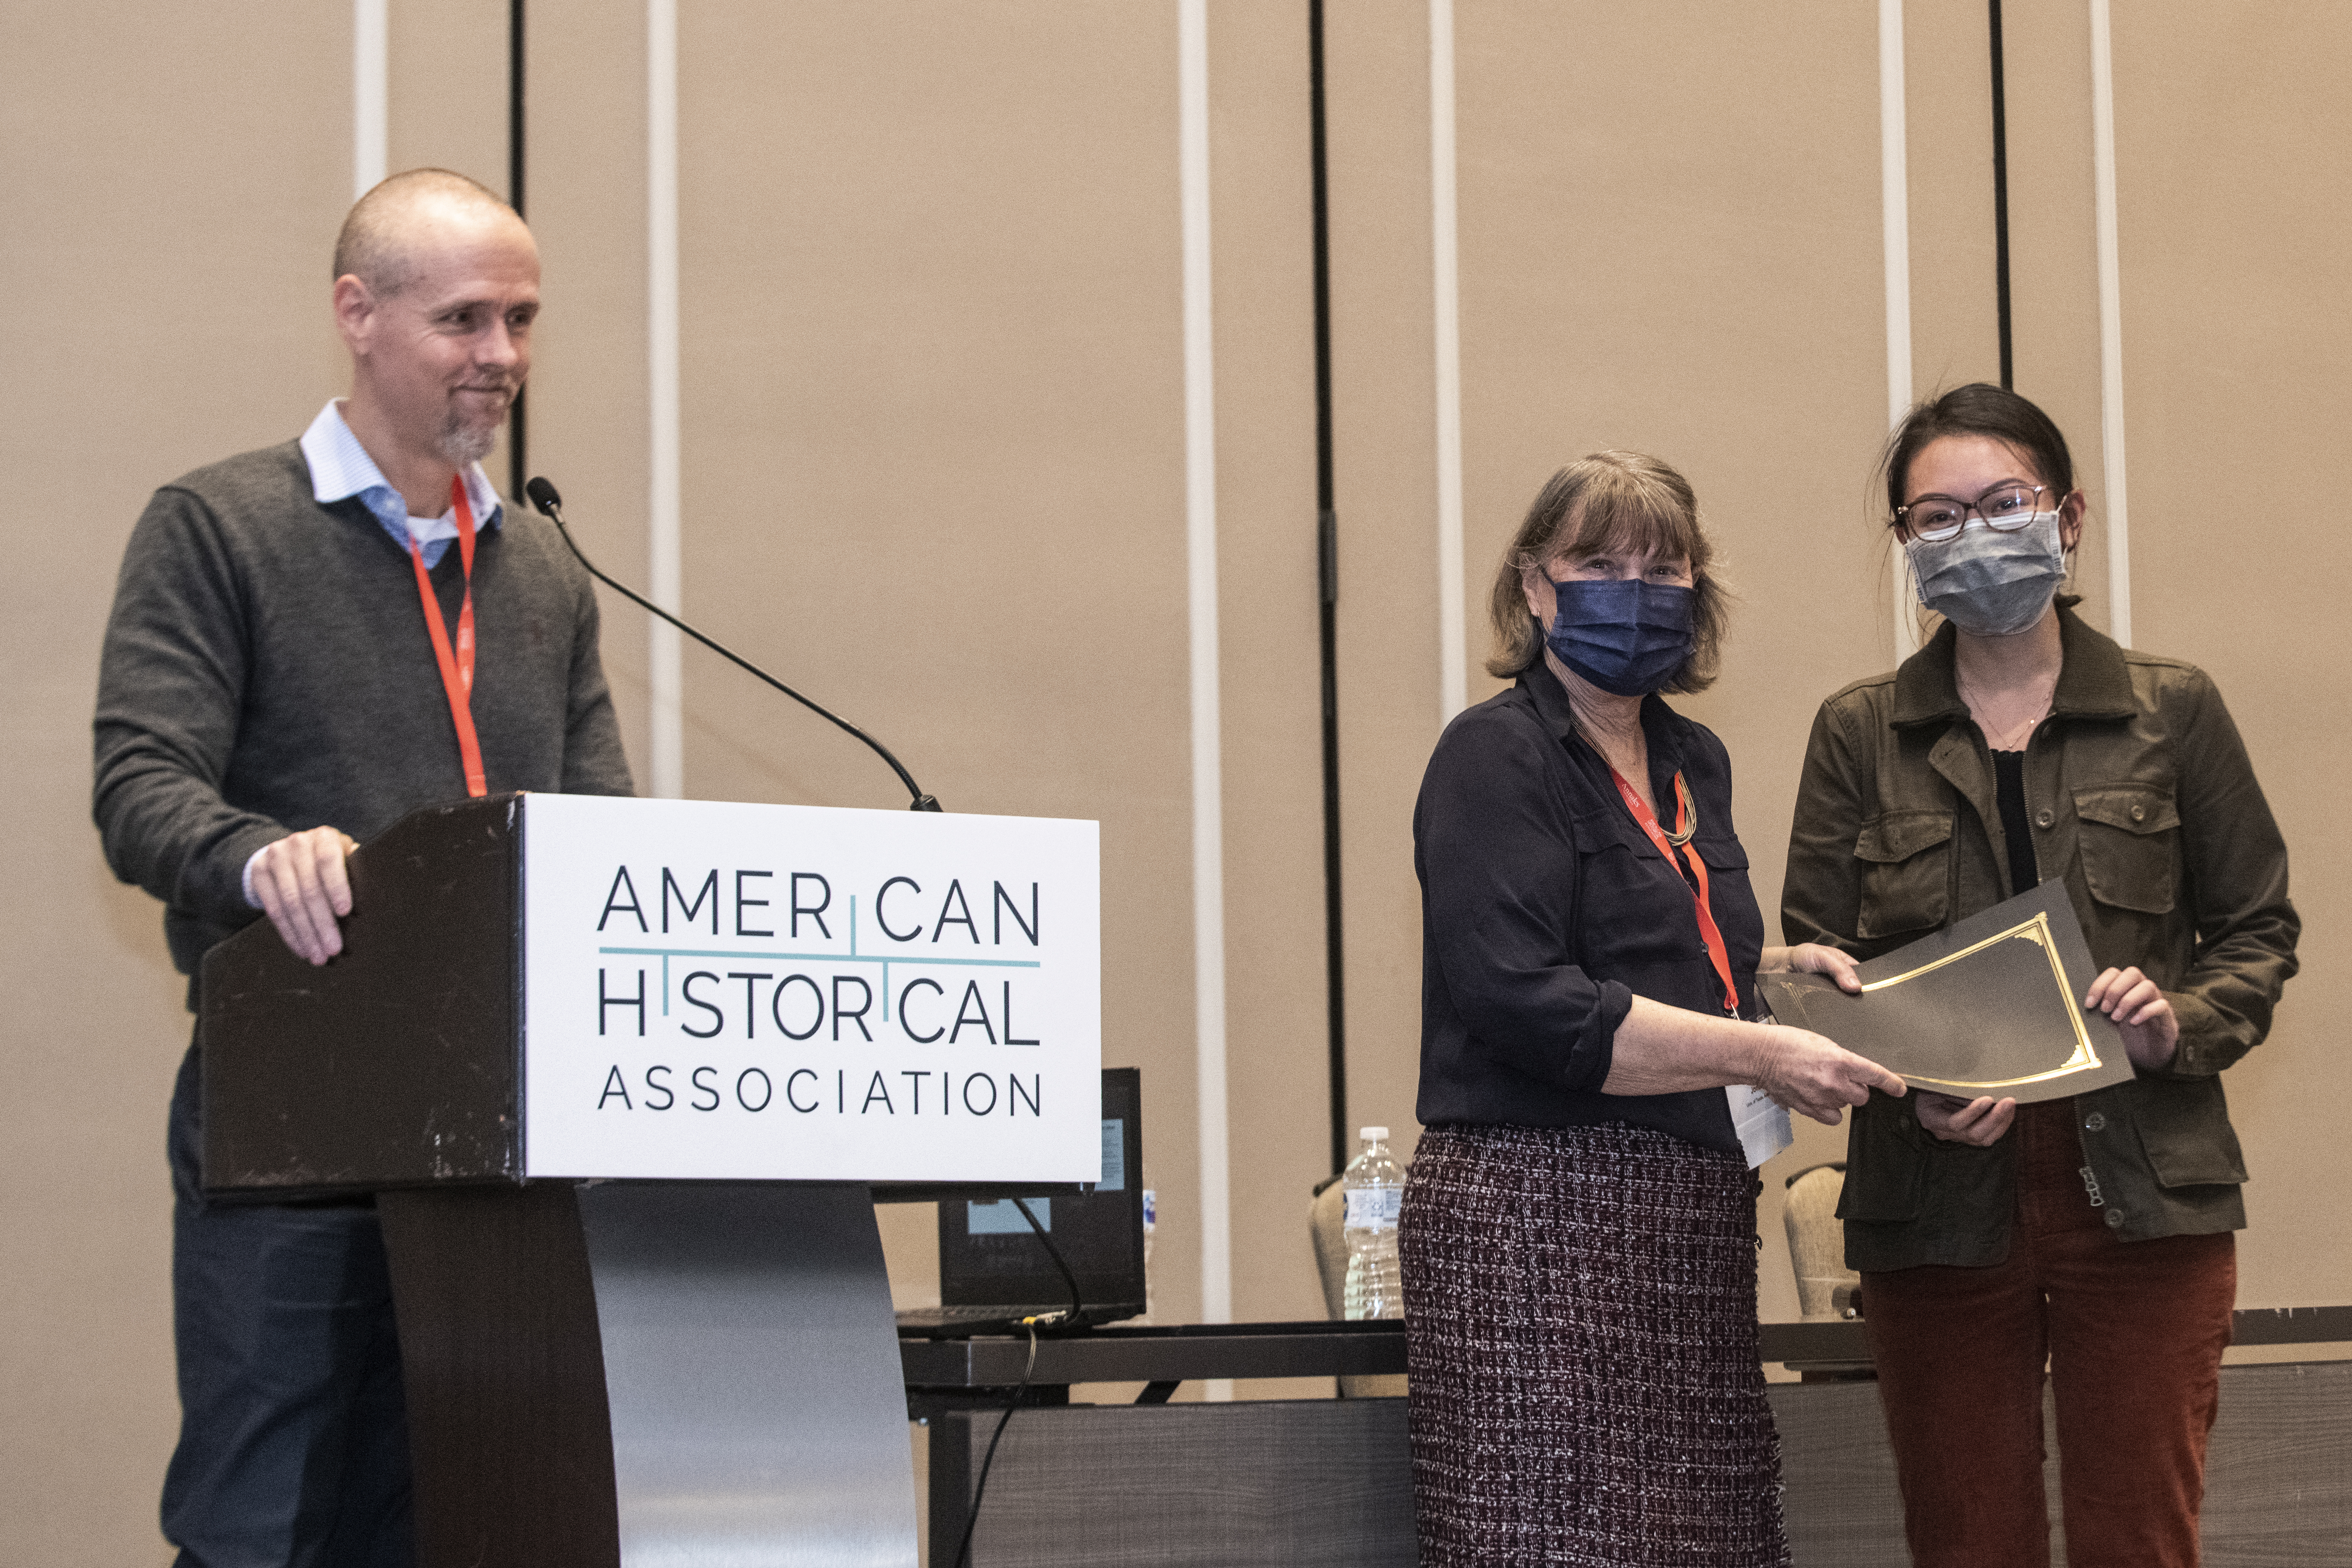 2022 president James H. Sweet stands behind a podium in a sweater, button down and slacks. 2021 president Jacqueline Jones stands next to the podium in a black button down and plaid skirt, and presents the Raymond J. Cunningham Prize to Ann Tran wearing a green jacket and red jeans.